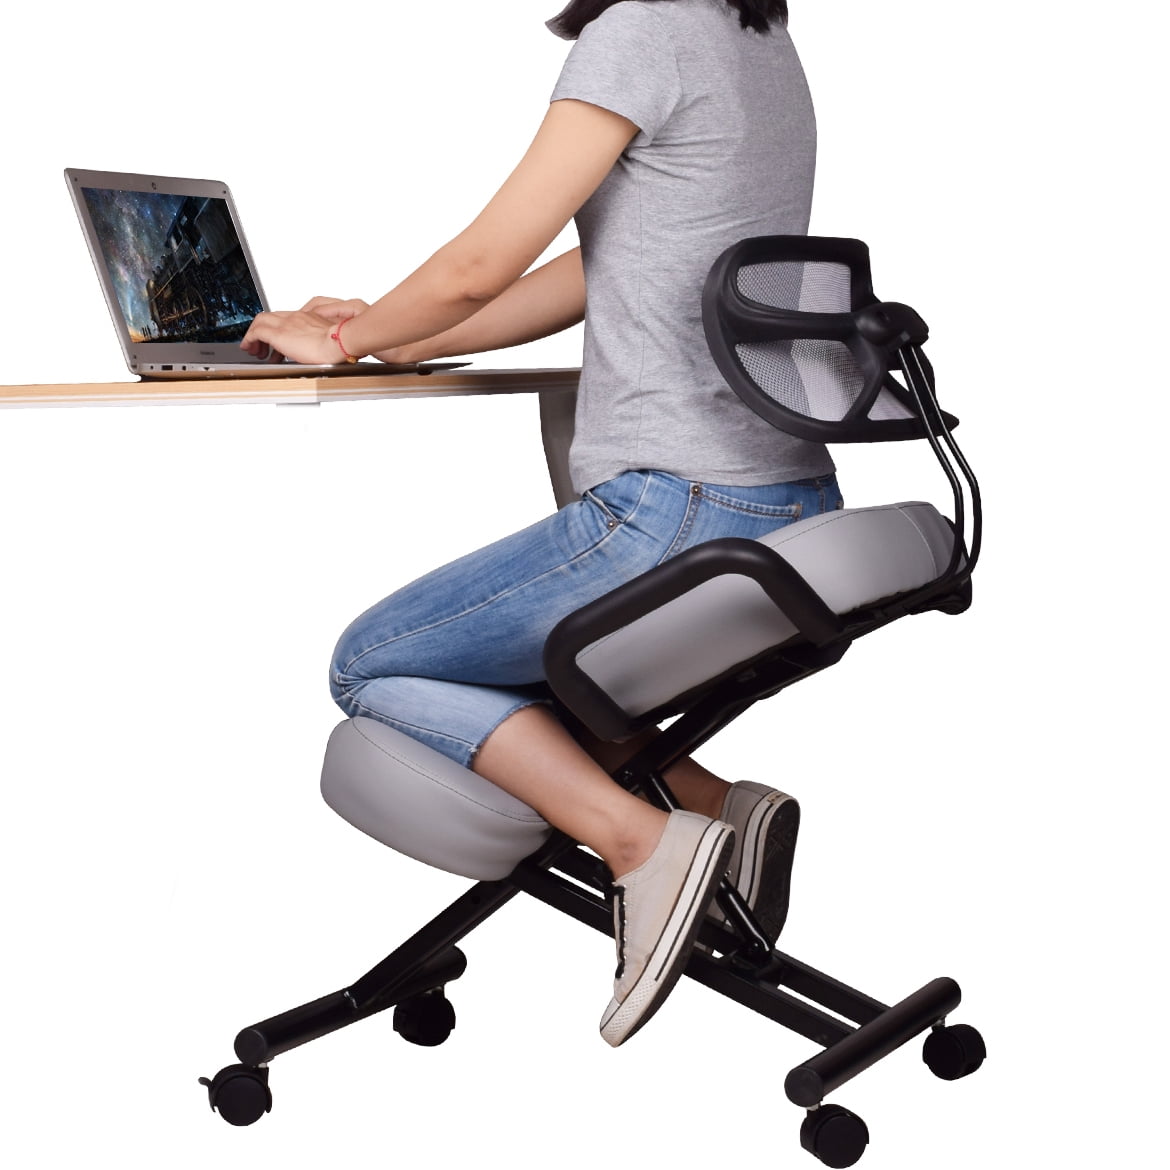 DRAGONN (By VIVO) Ergonomic Kneeling Chair with Back Support, Gray 